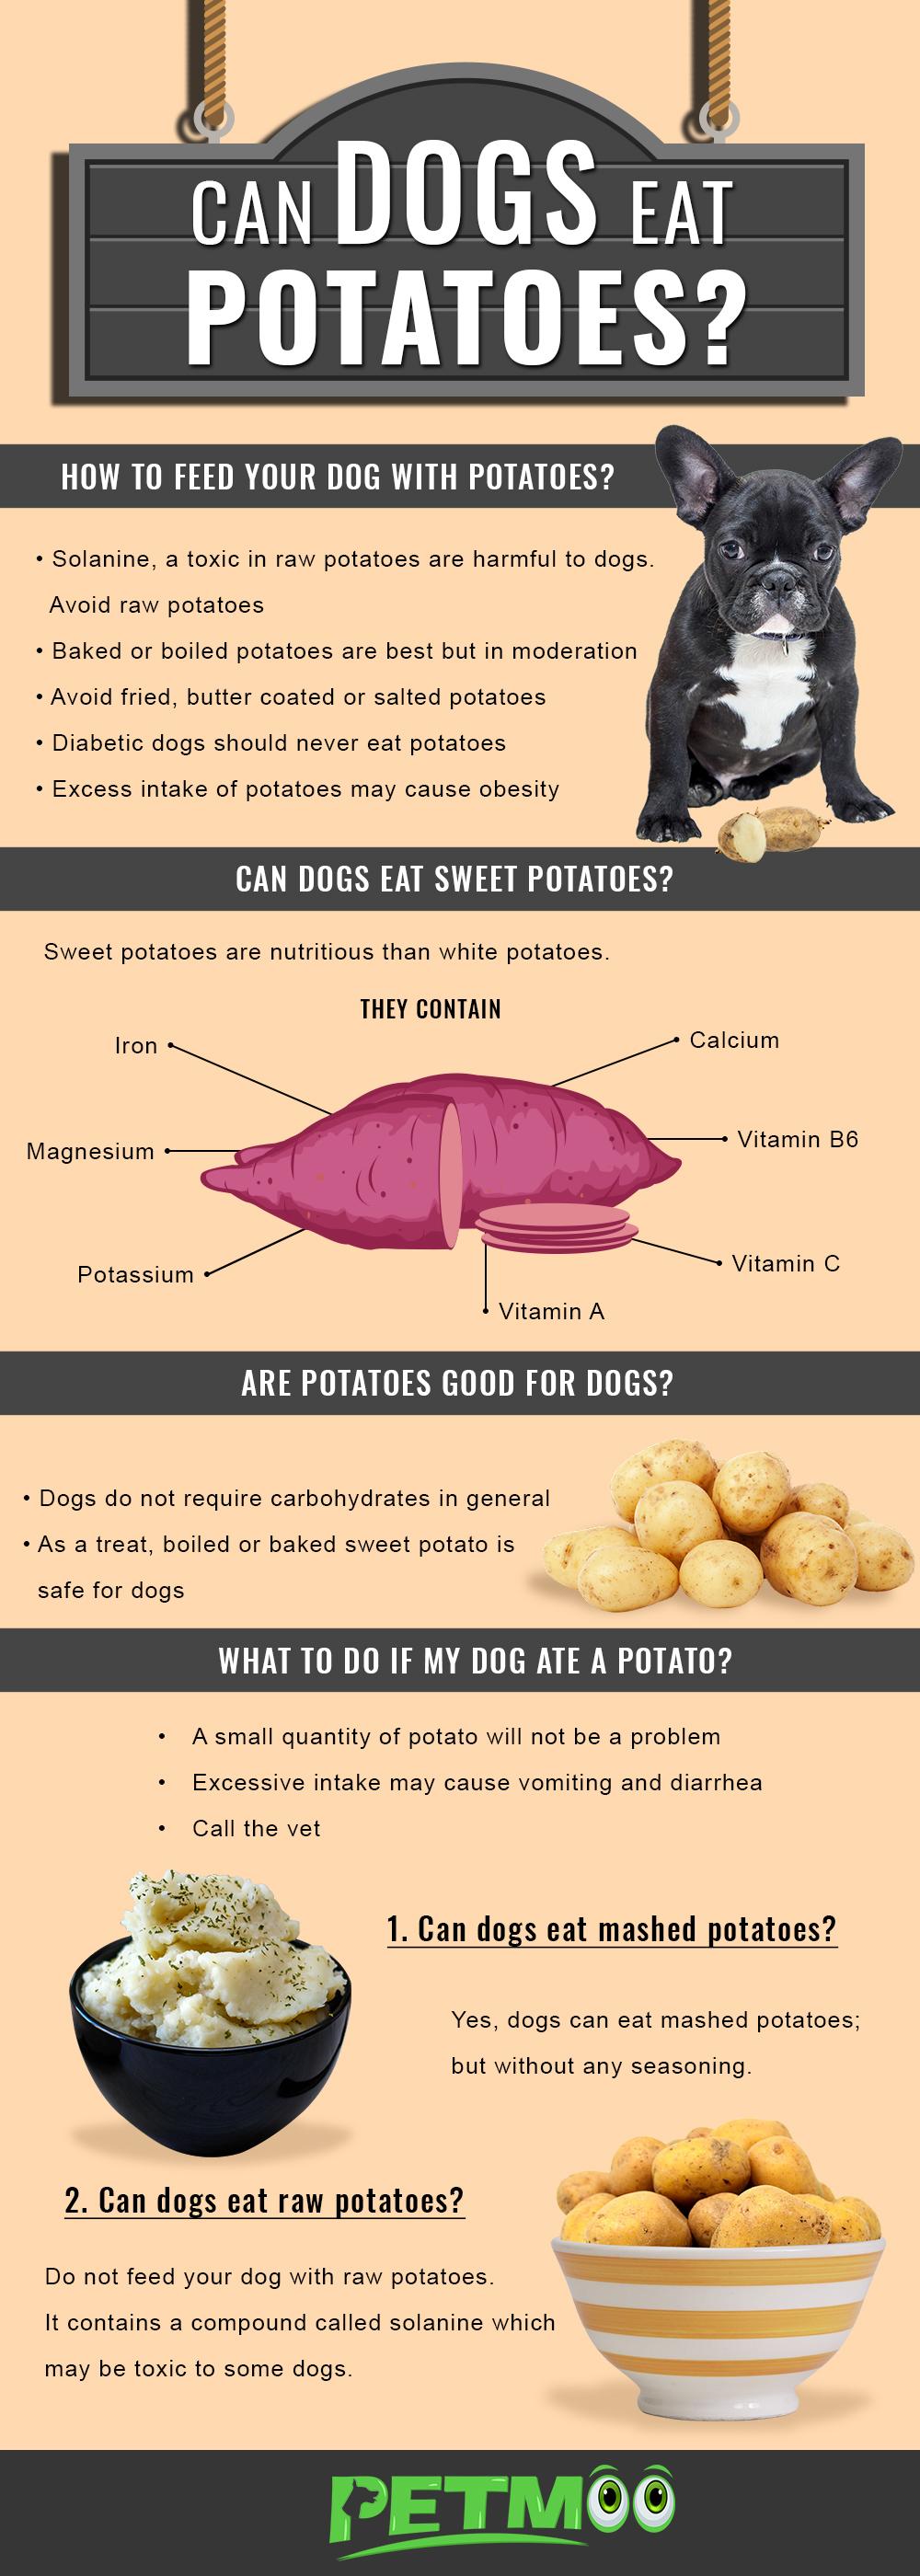 Can Dogs Eat potatoes Infographic